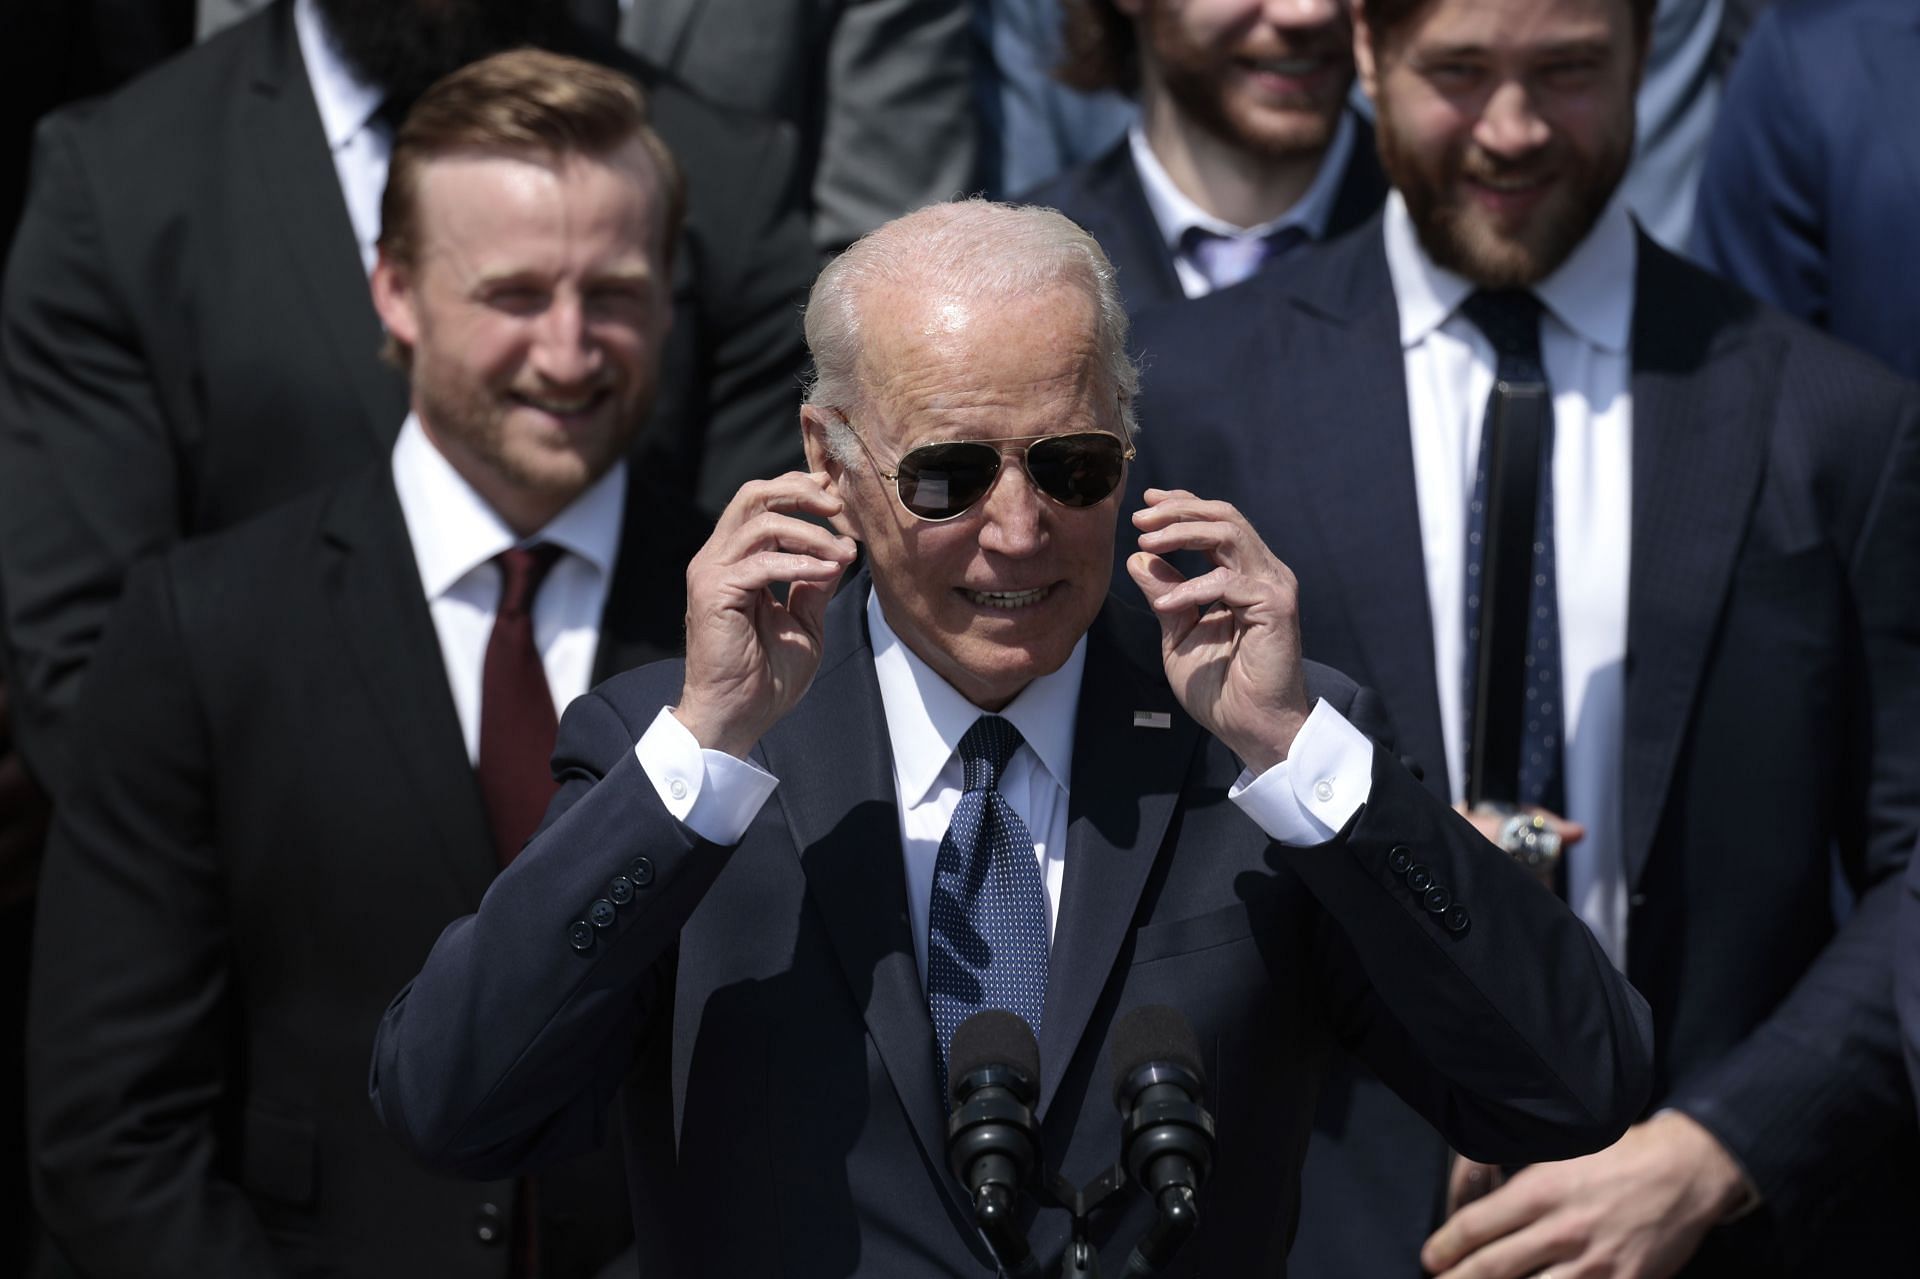 President Biden Hosts The 2020-2021 Stanley Cup Champions, The Tampa Bay Lightning To The White House